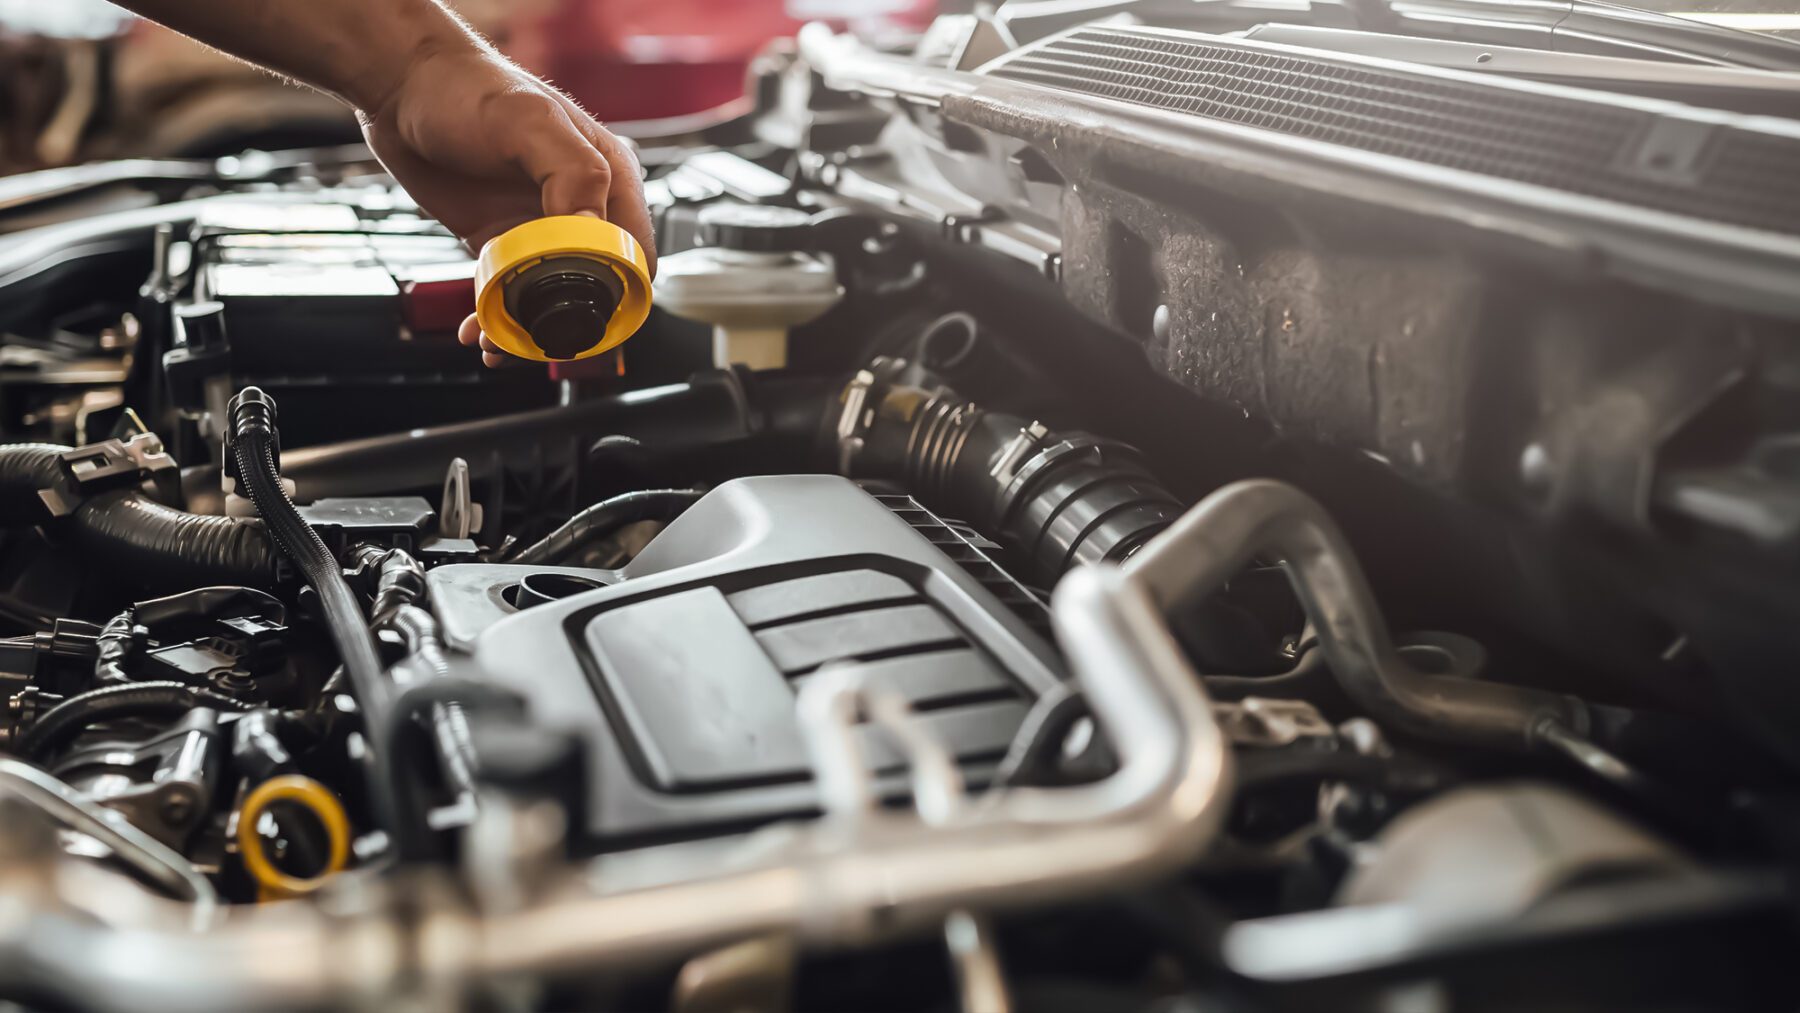 How to Find an Engine Coolant Leak without a Pressure Tester